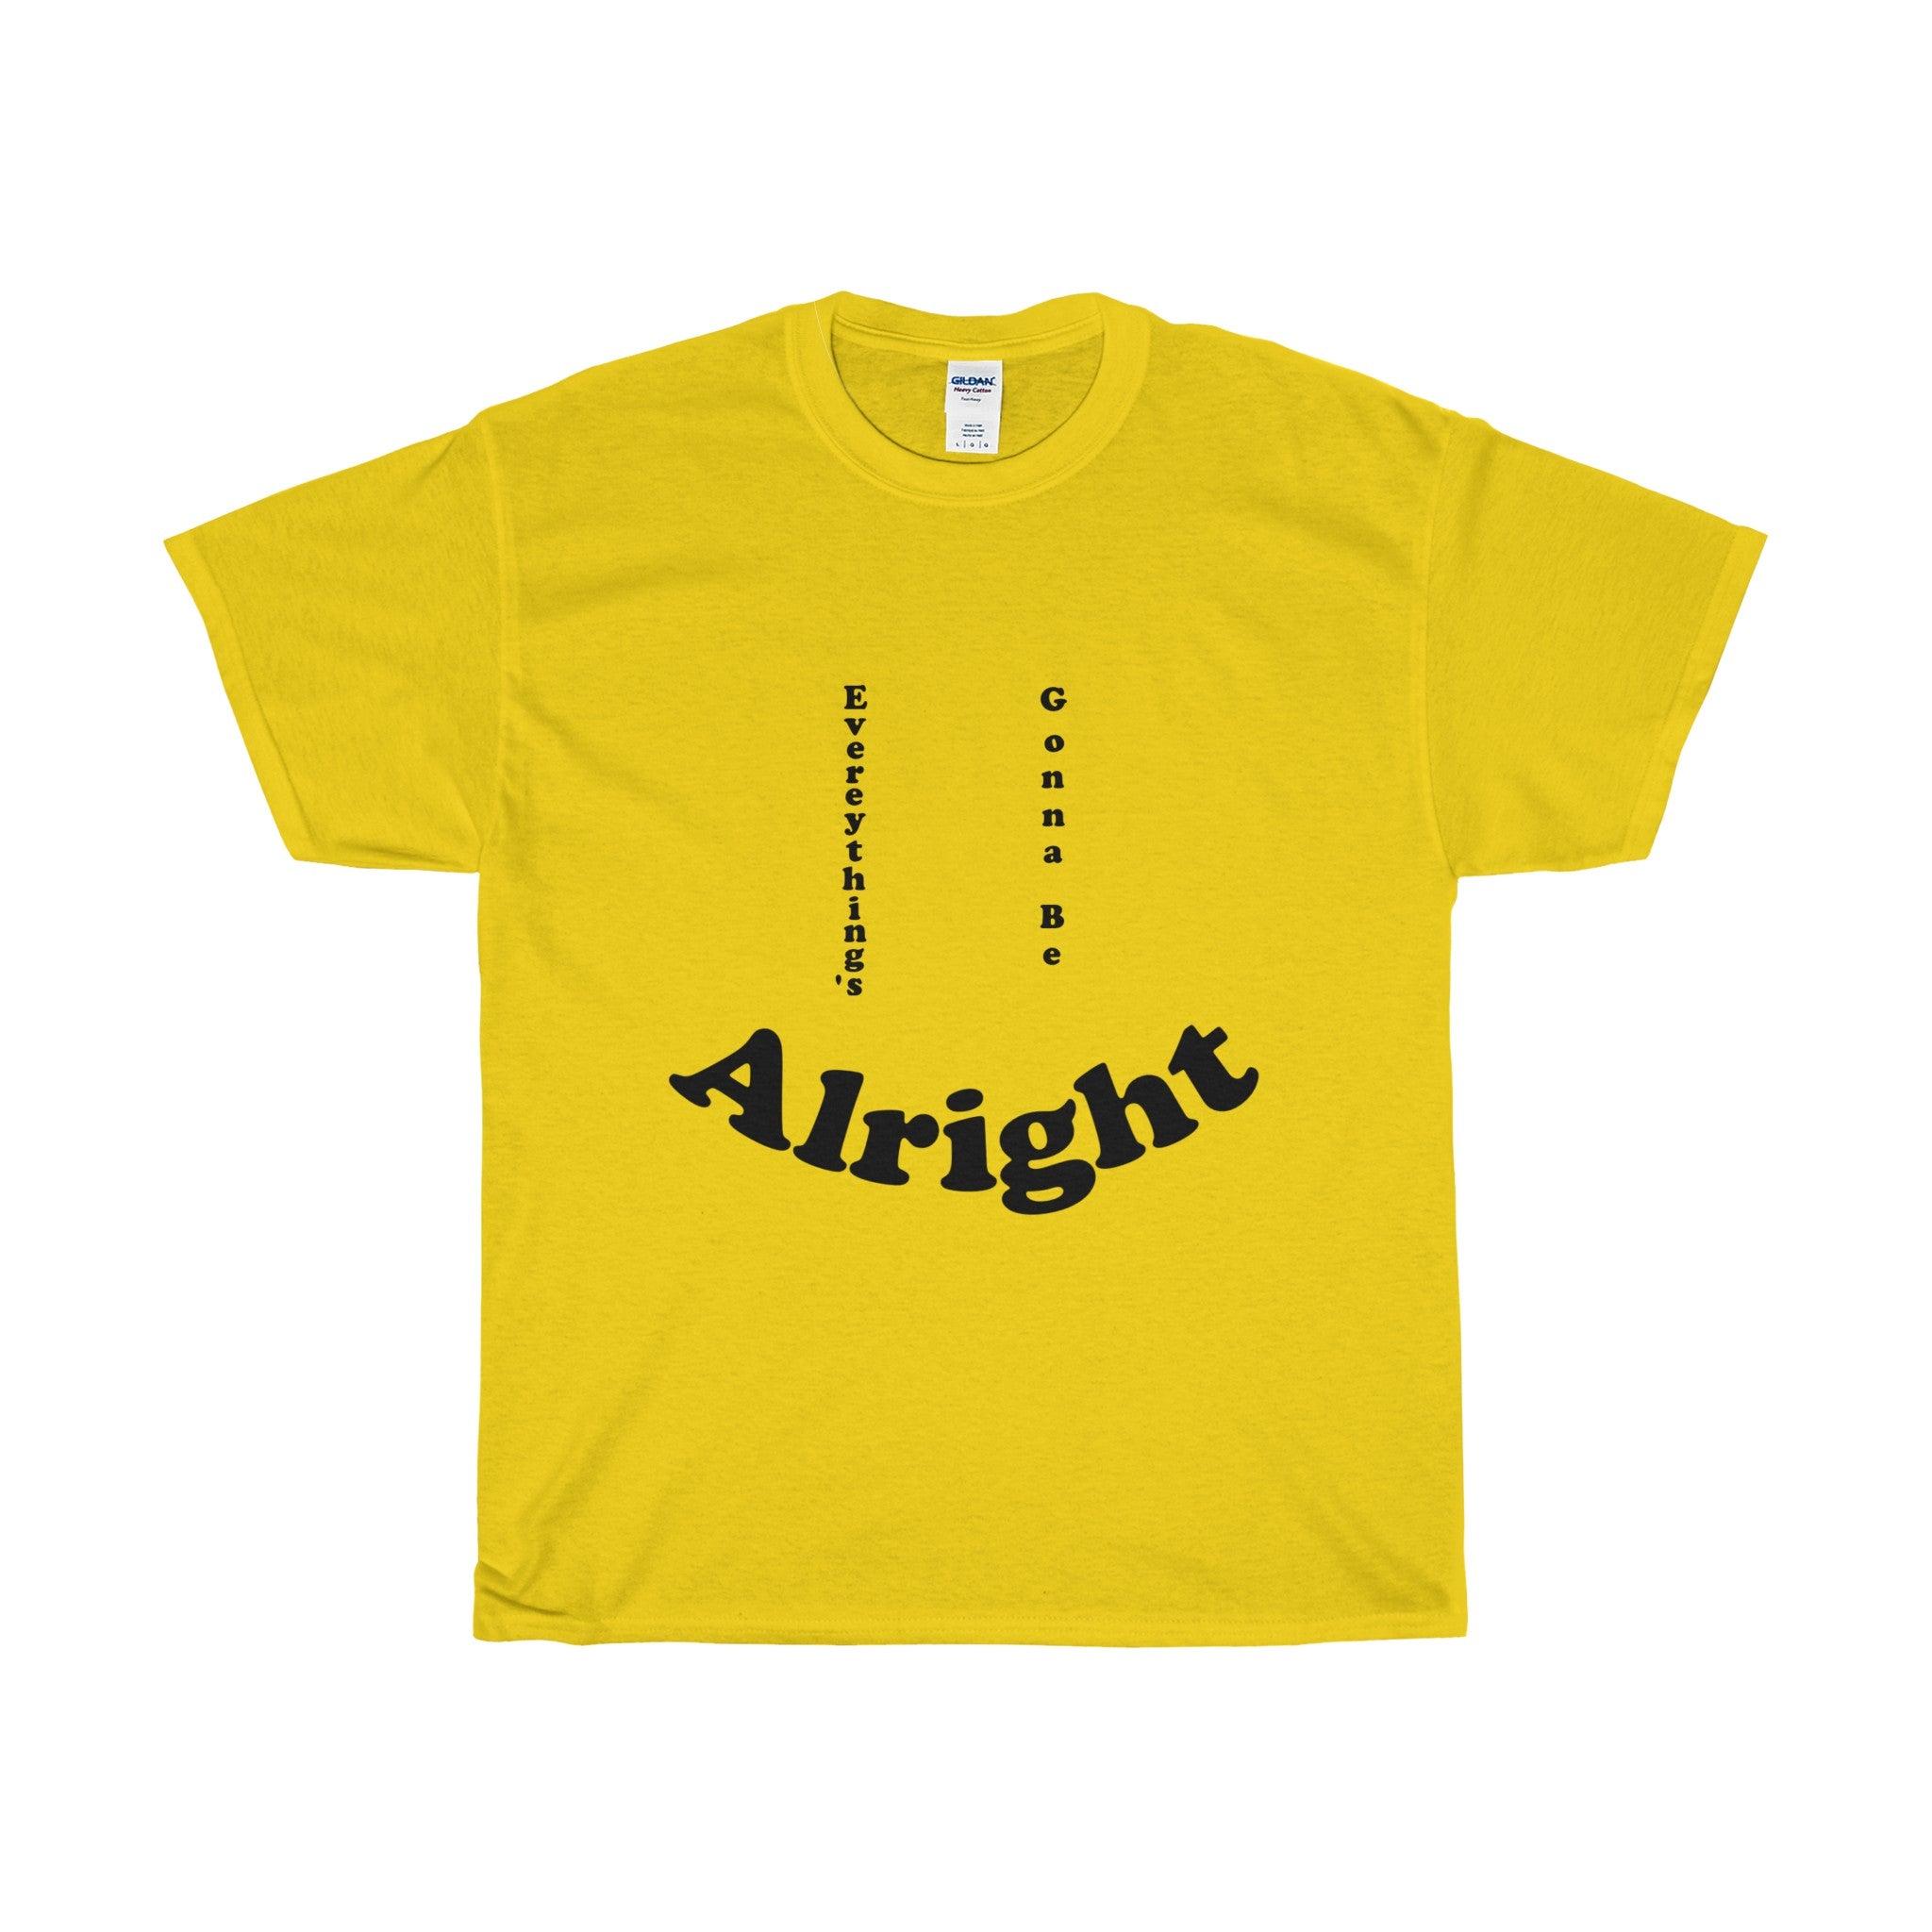 Vintage Retro Everything's Gonna Be Alright Unisex T-Shirt Tee